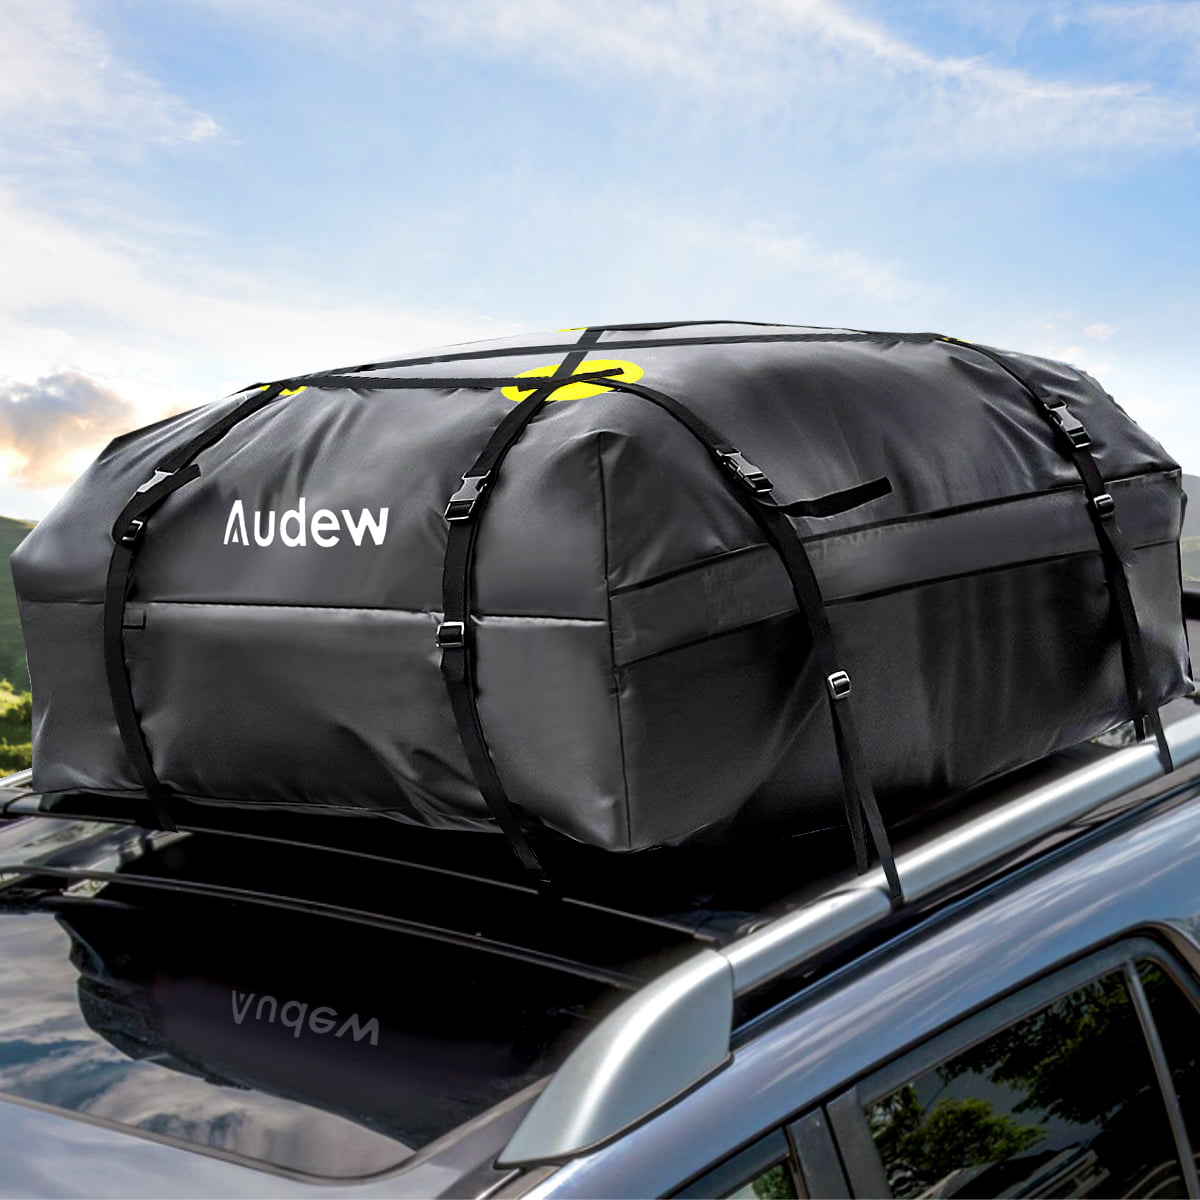 Car Top Carrier 15 Cubic Feet Waterproof Roof Top Cargo Bag Fit for The Outdoor Elements Strong Cloth Straps